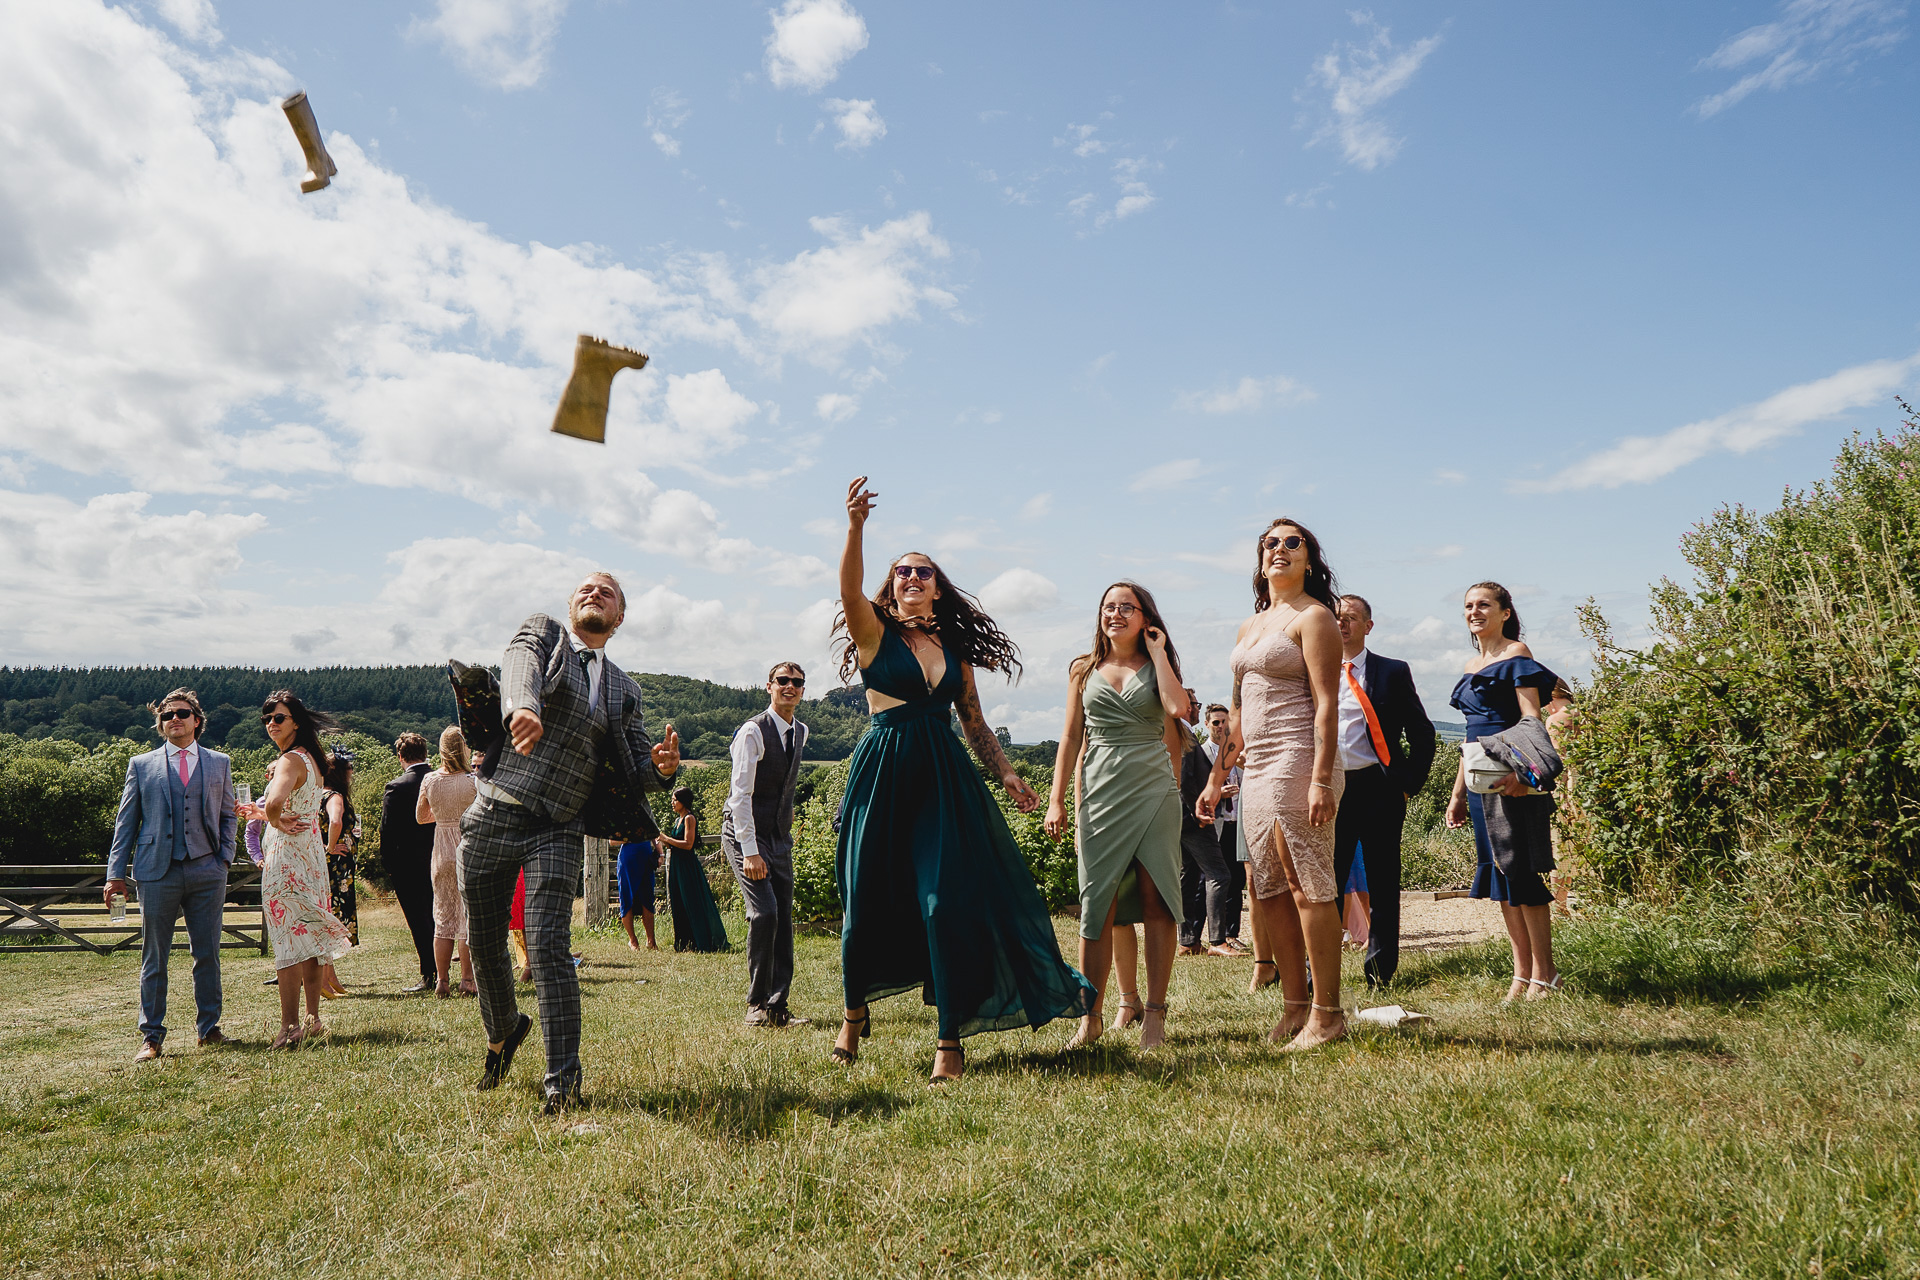 Wedding guests throwing wellies in a field